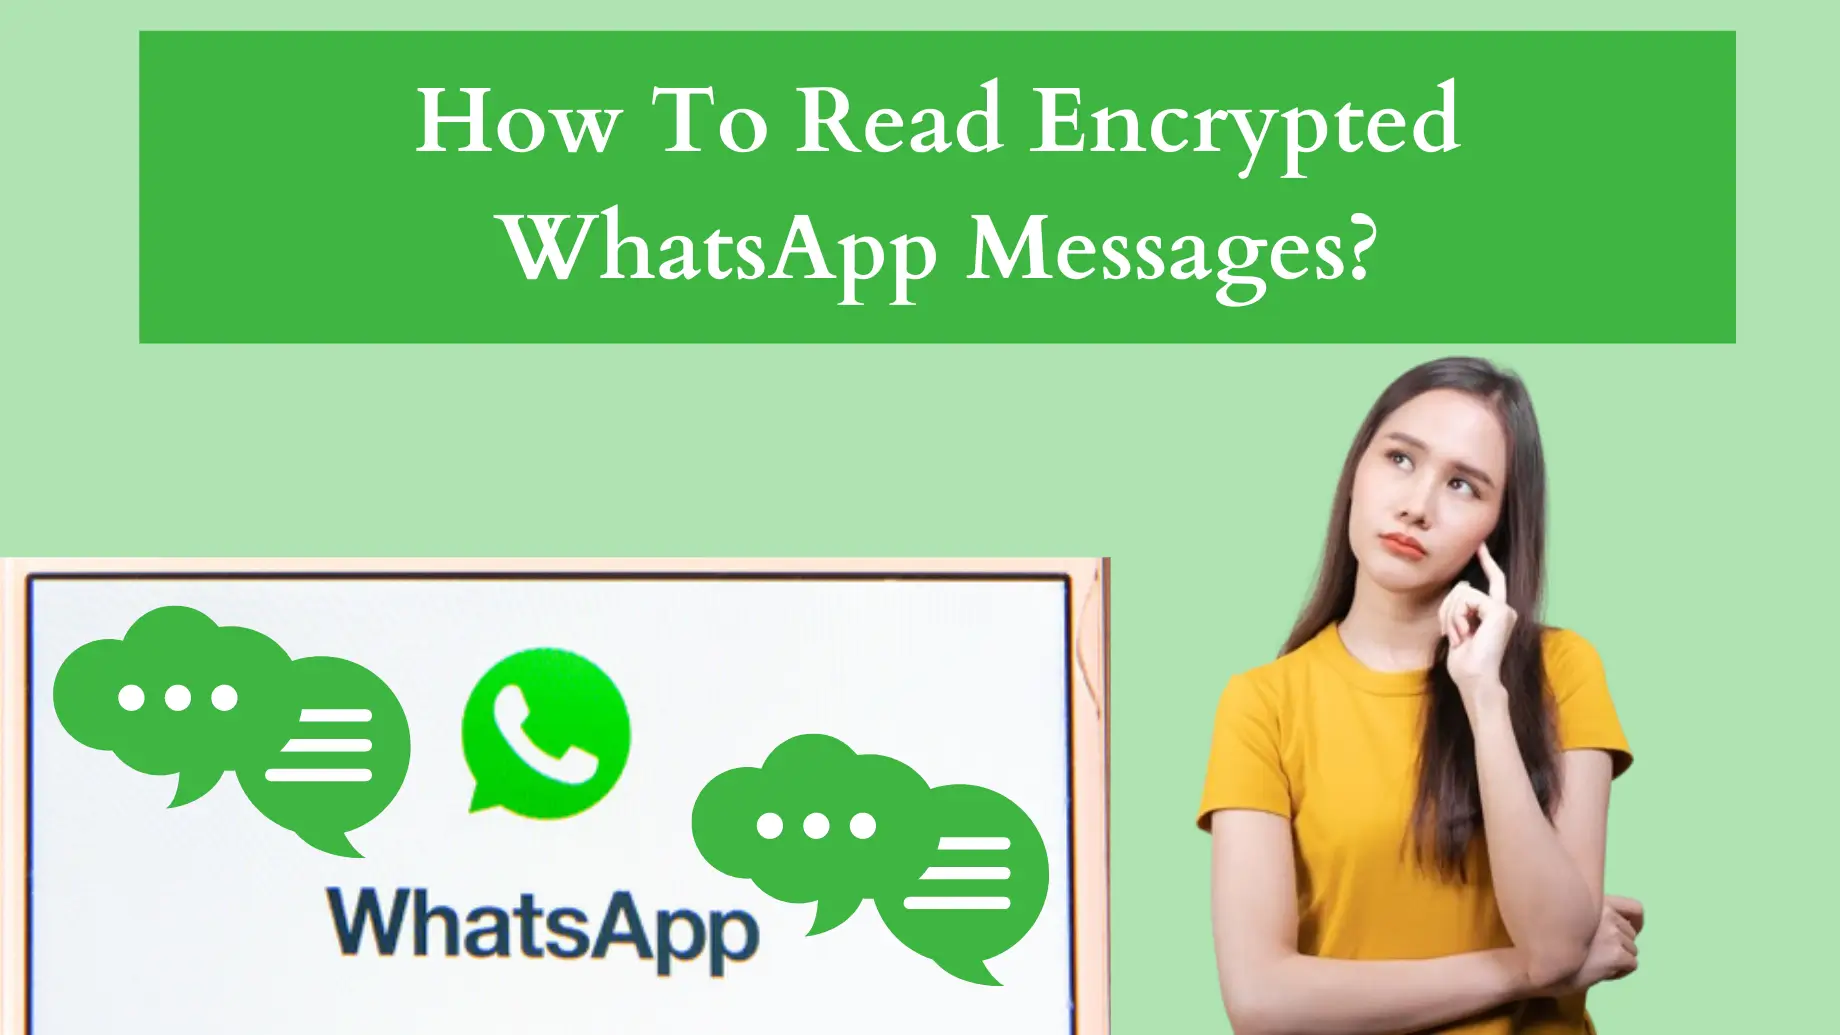 How To Read Encrypted WhatsApp Messages